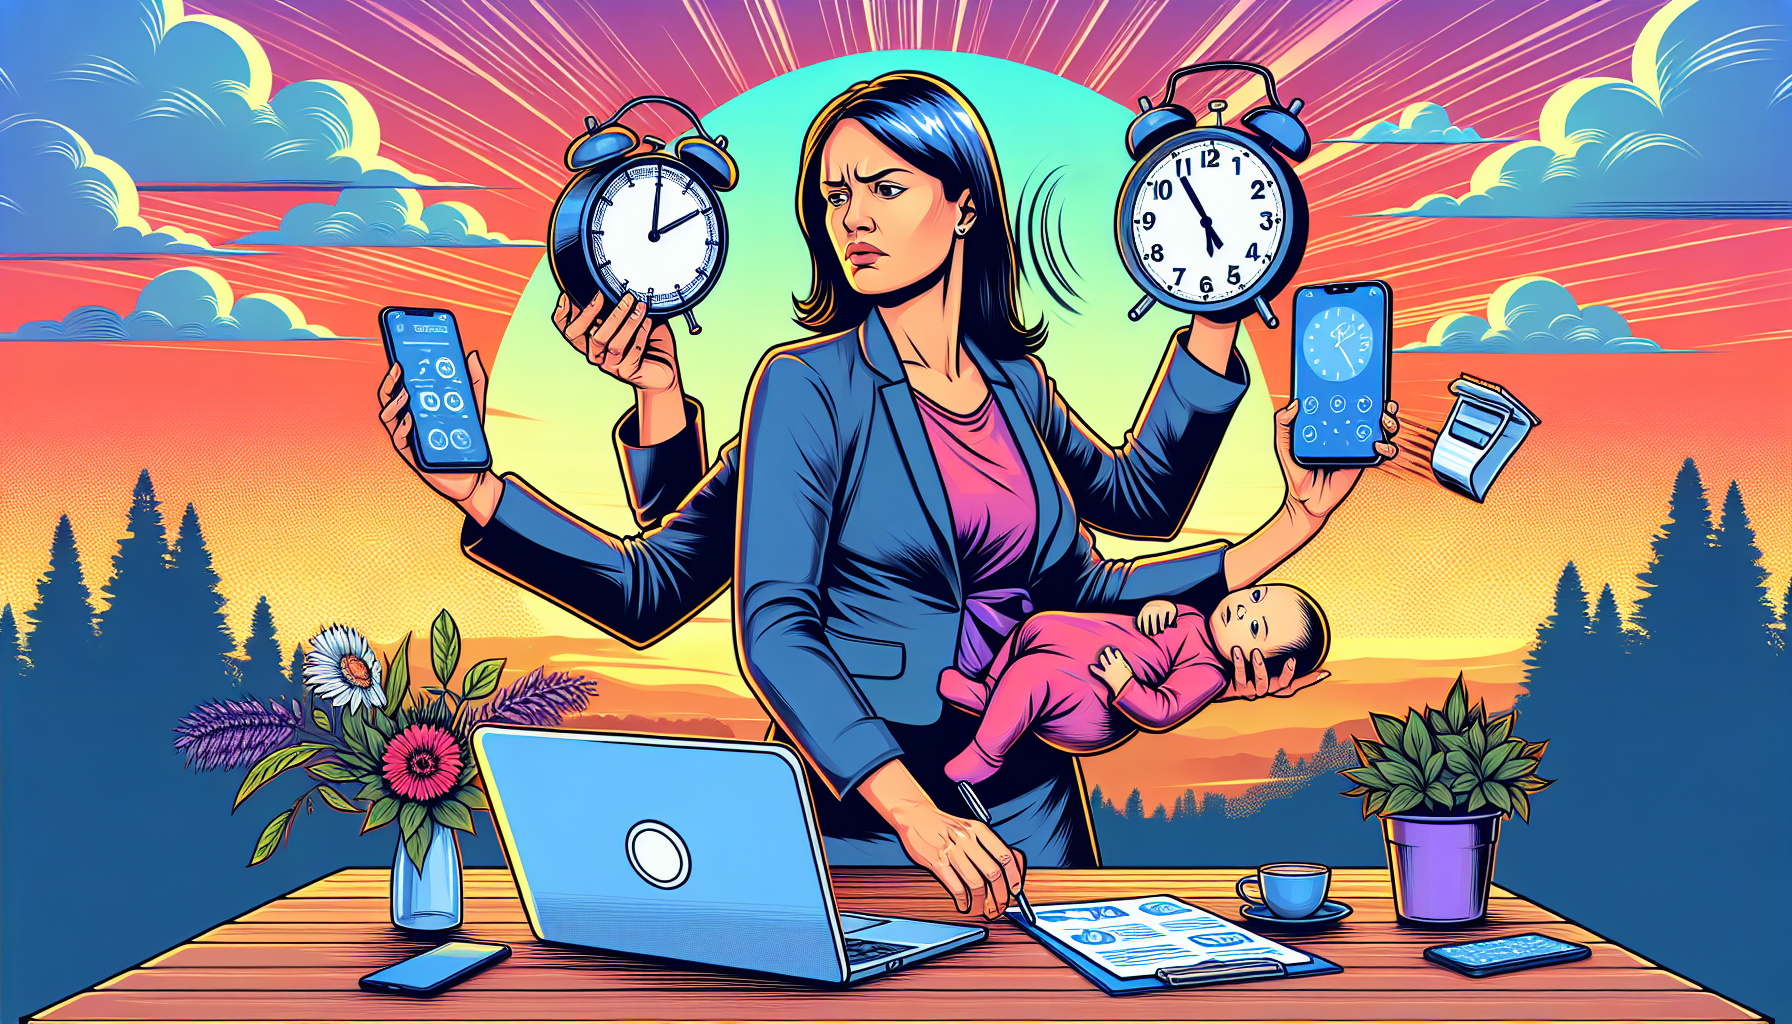 A stressed office worker juggling a clock, laptop, phone, and baby with a serene sunset background.